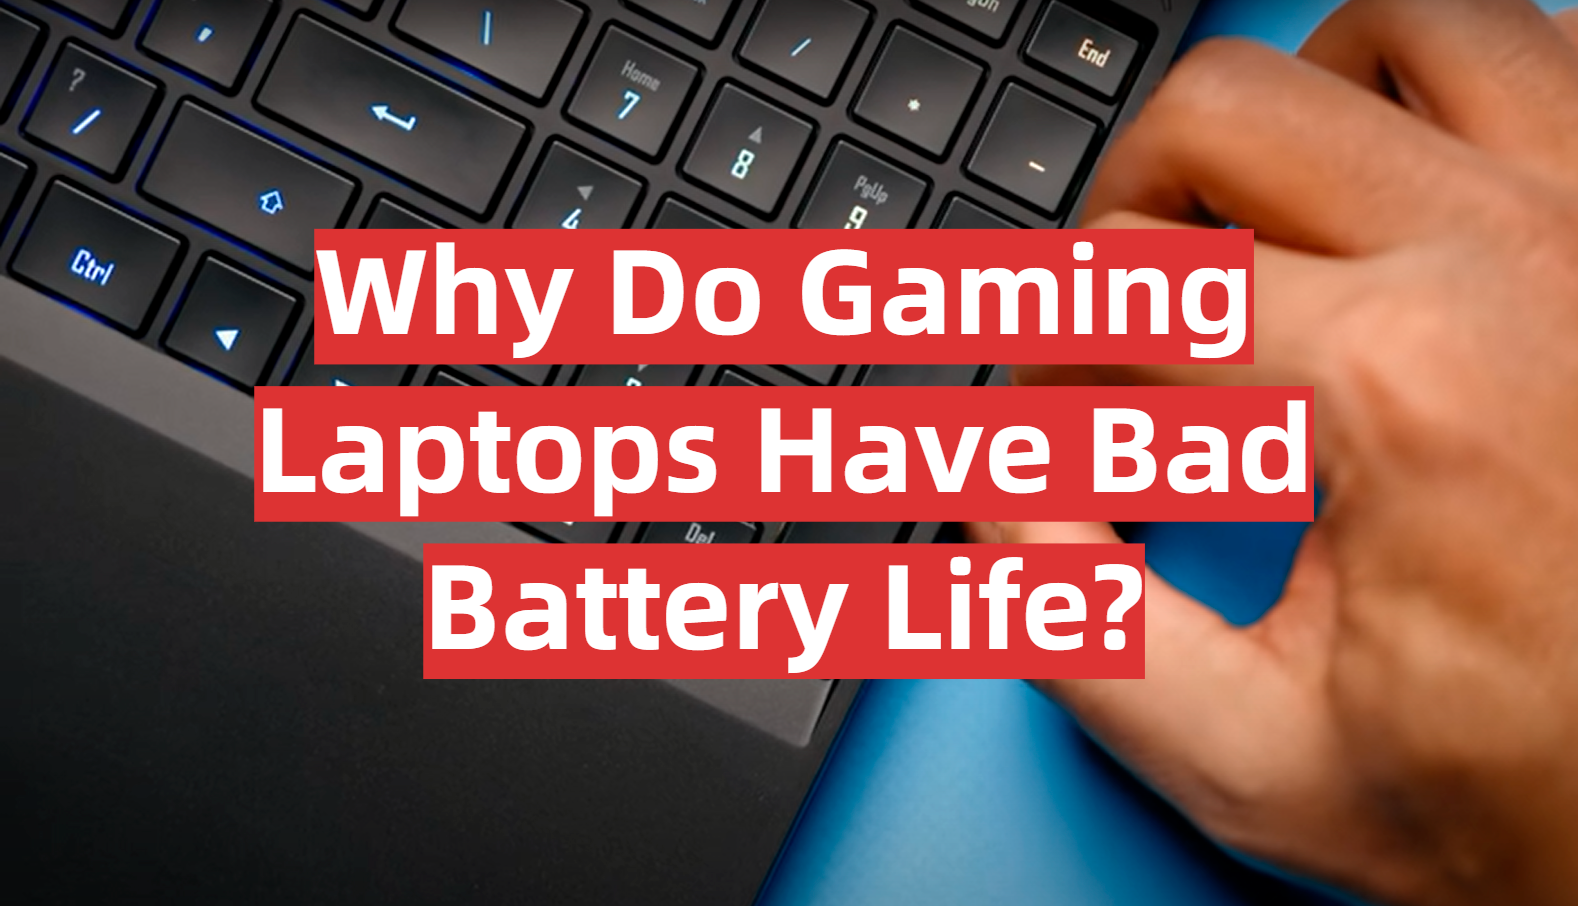 Why Do Gaming Laptops Have Bad Battery Life?